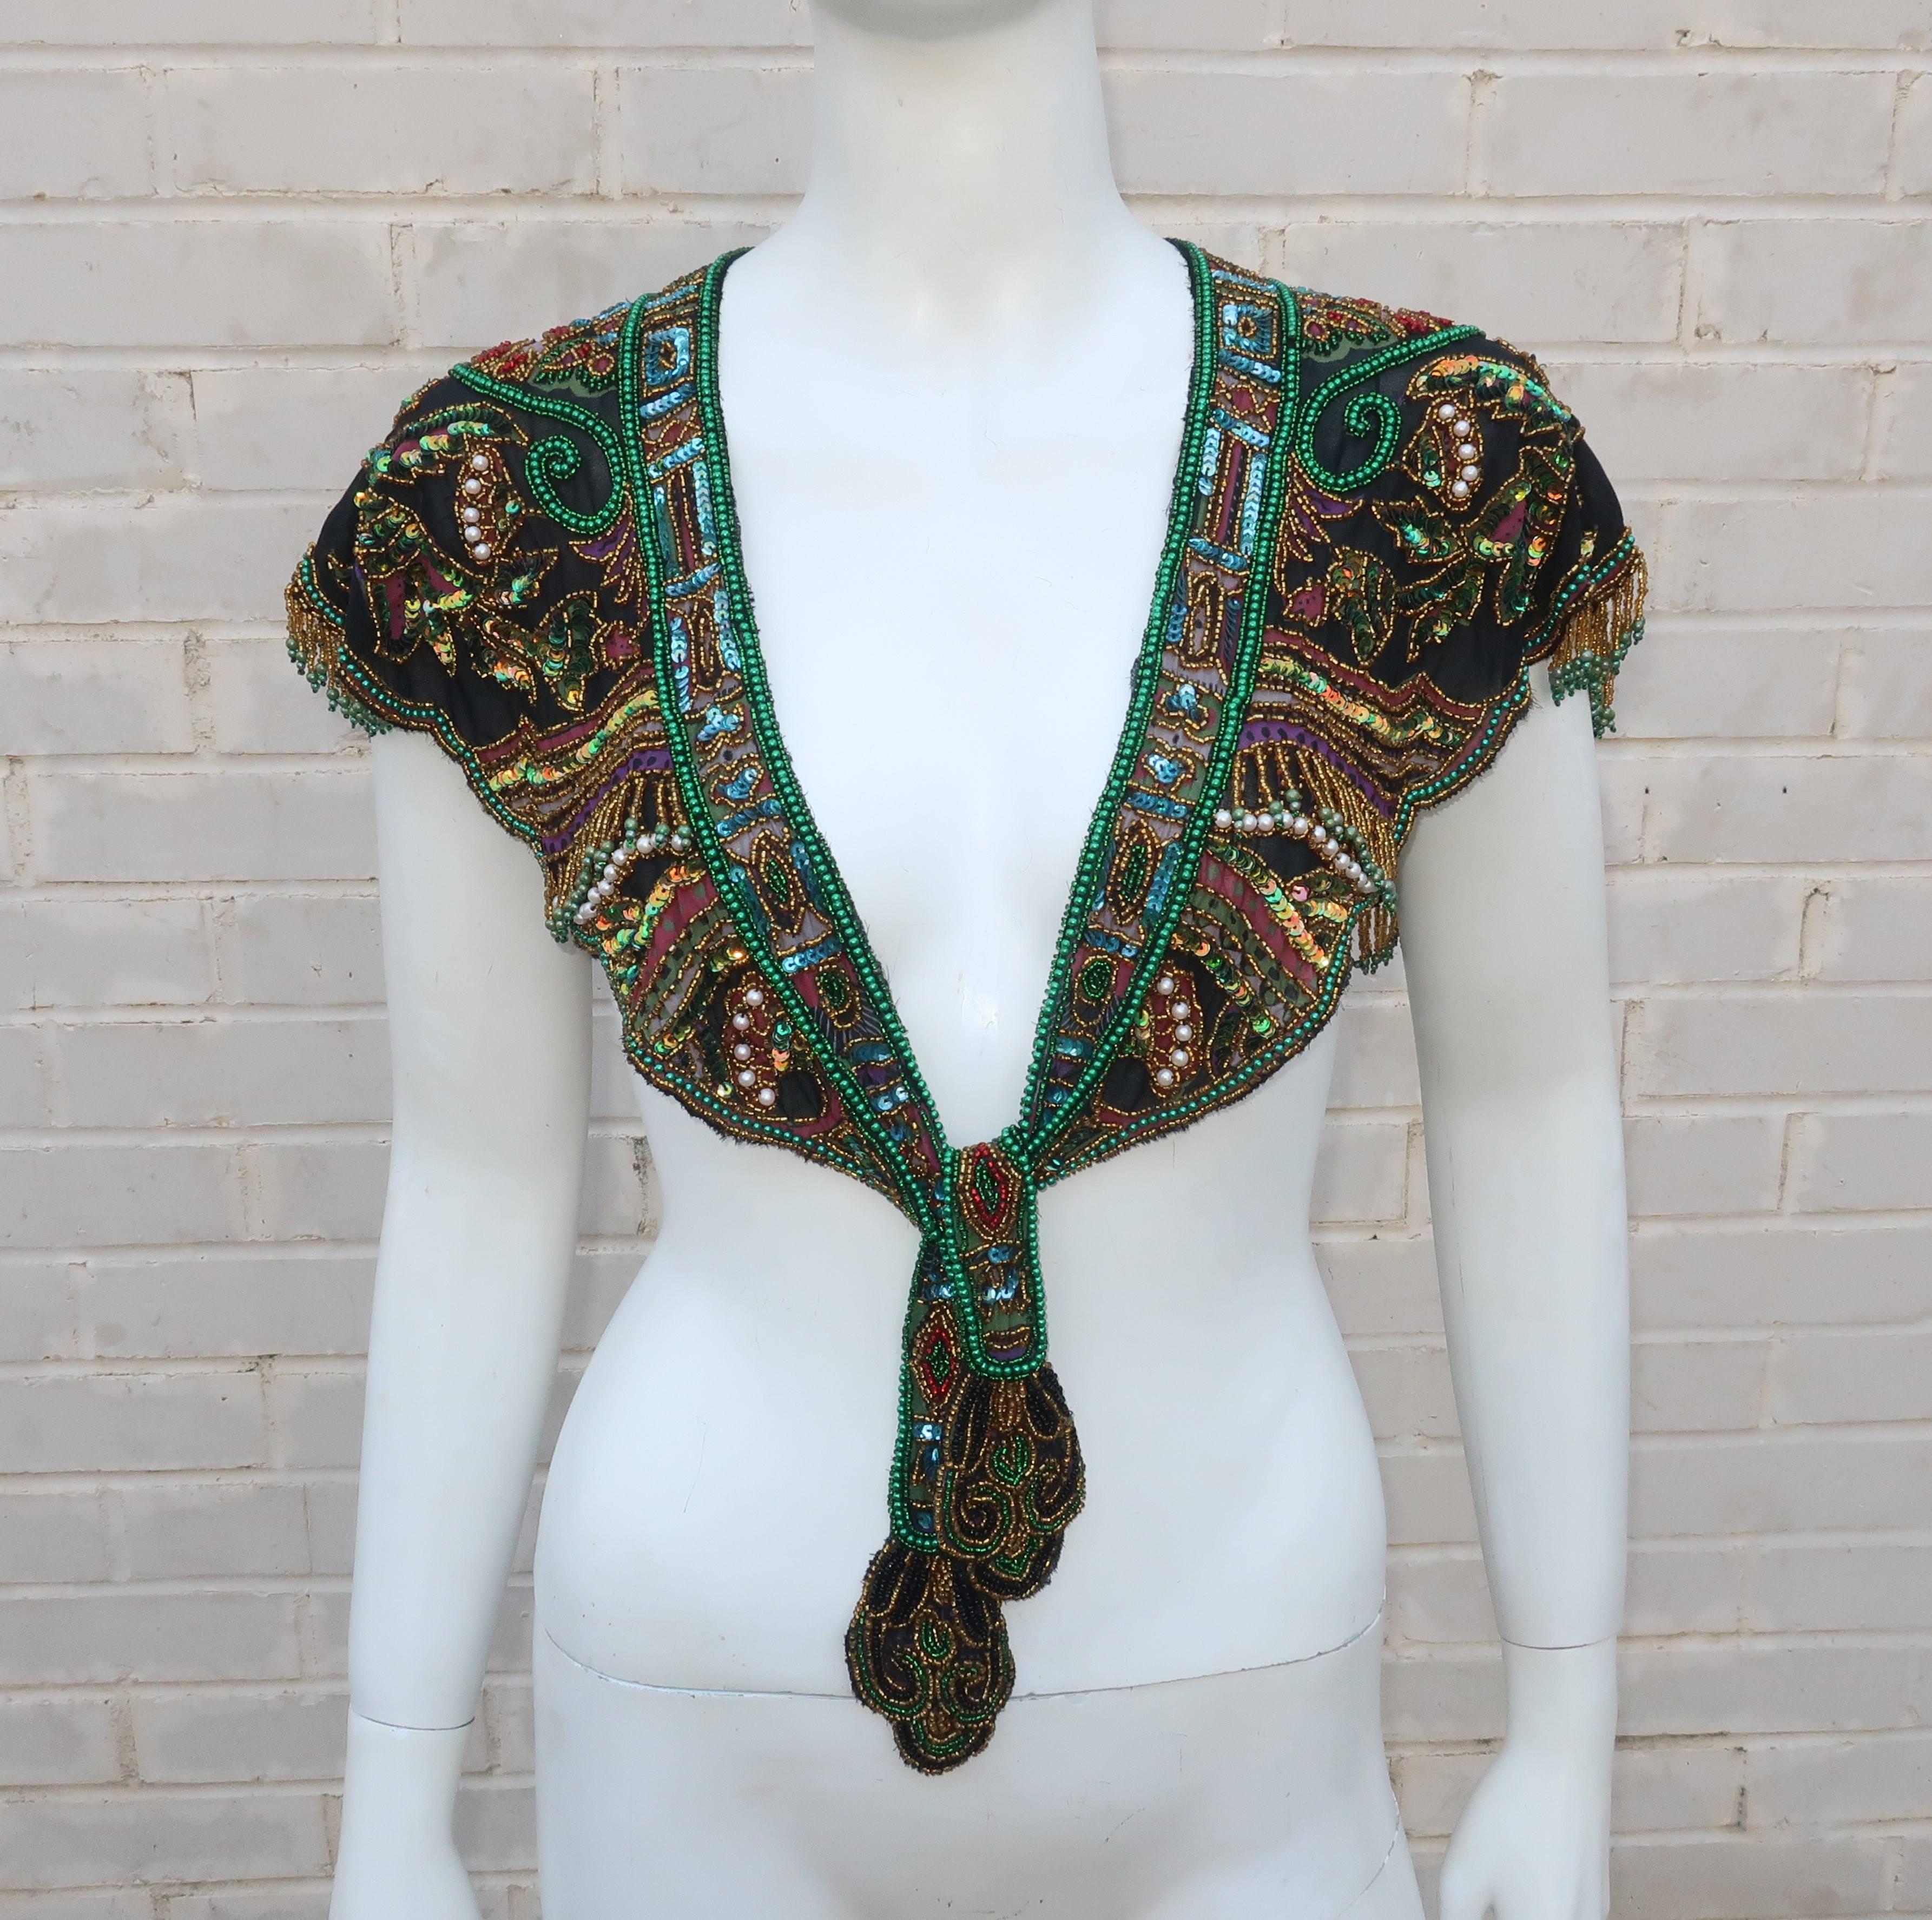 What a beauty!  This rayon chiffon 1970's collar is heavily beaded and draped with a nod to the Egyptian Revival style.  The underlining chiffon fabric is dyed with dark jewel tone colors including midnight blue (almost black), purple, magenta and